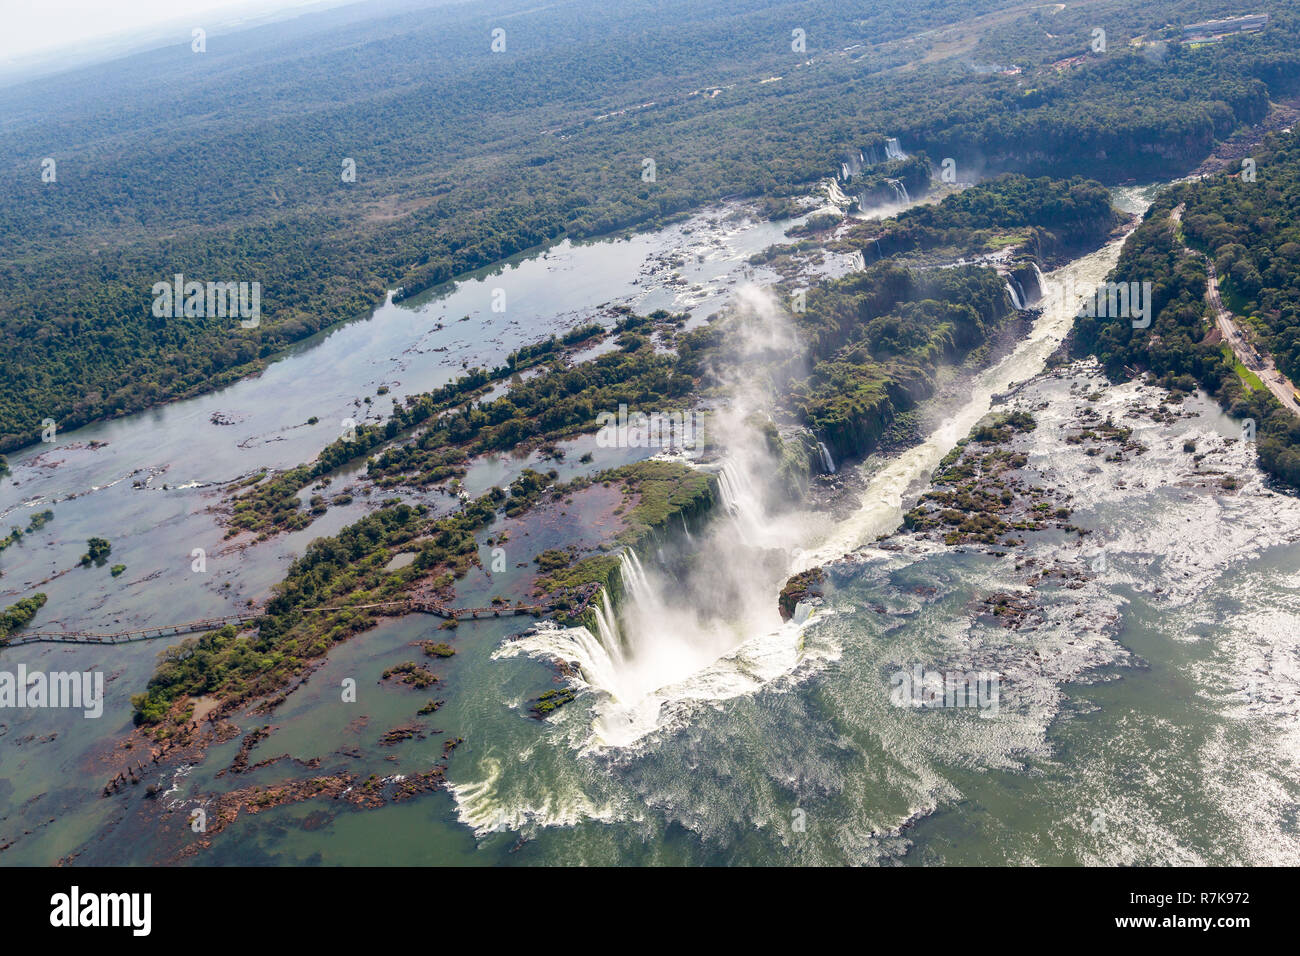 Aerial bird's-eye view panorama of Iguazu Falls from above, from a helicopter. Border of Brazil and Argentina. Iguassu, Iguacu waterfalls. Stock Photo